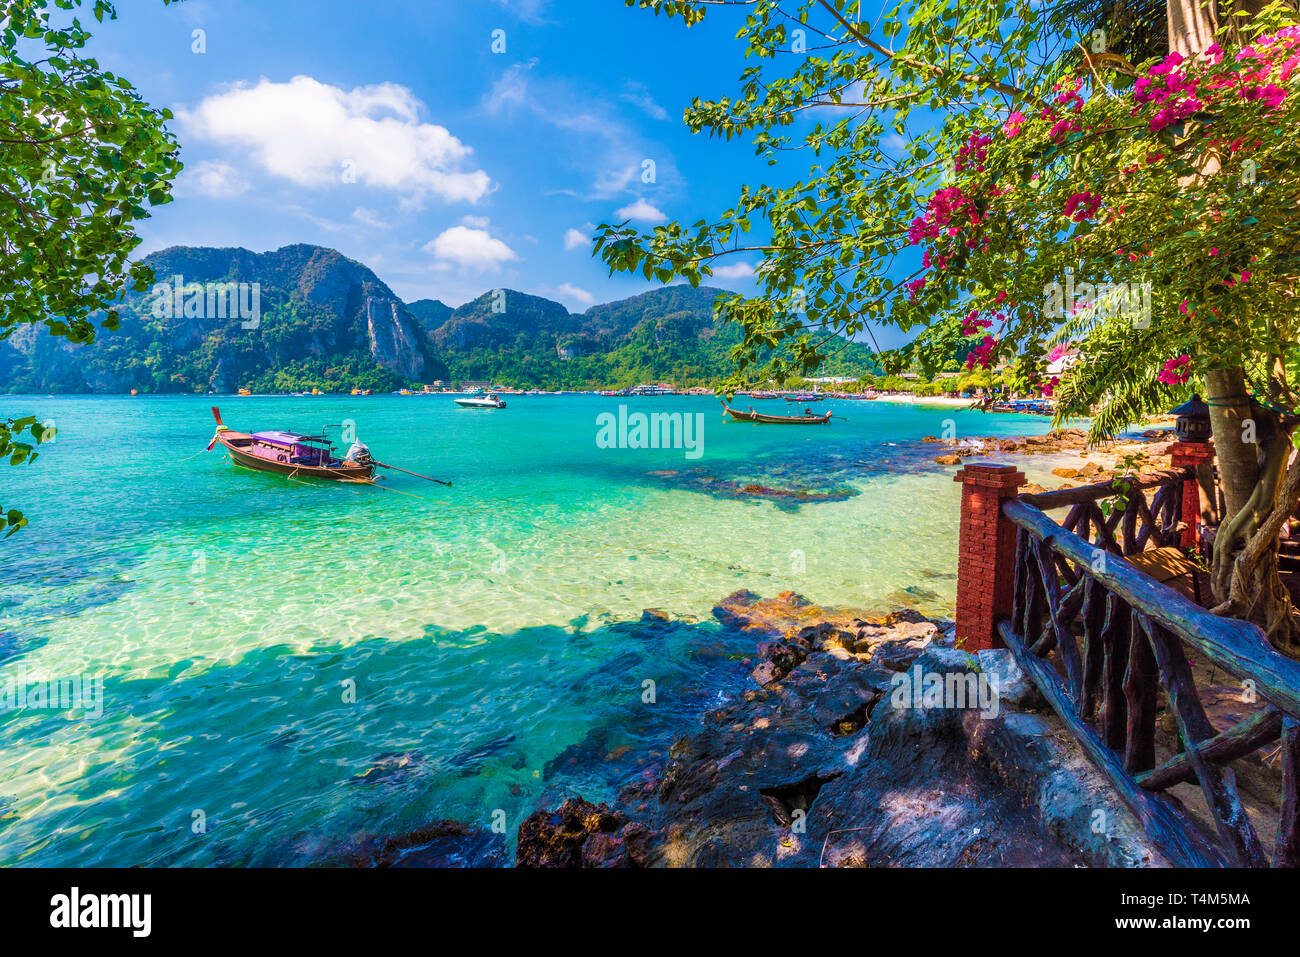 Beautiful summer scene and destination with mountains and turquoise sea water in Ton Sai Bay village, region of Phi Phi, Thailand Stock Photo